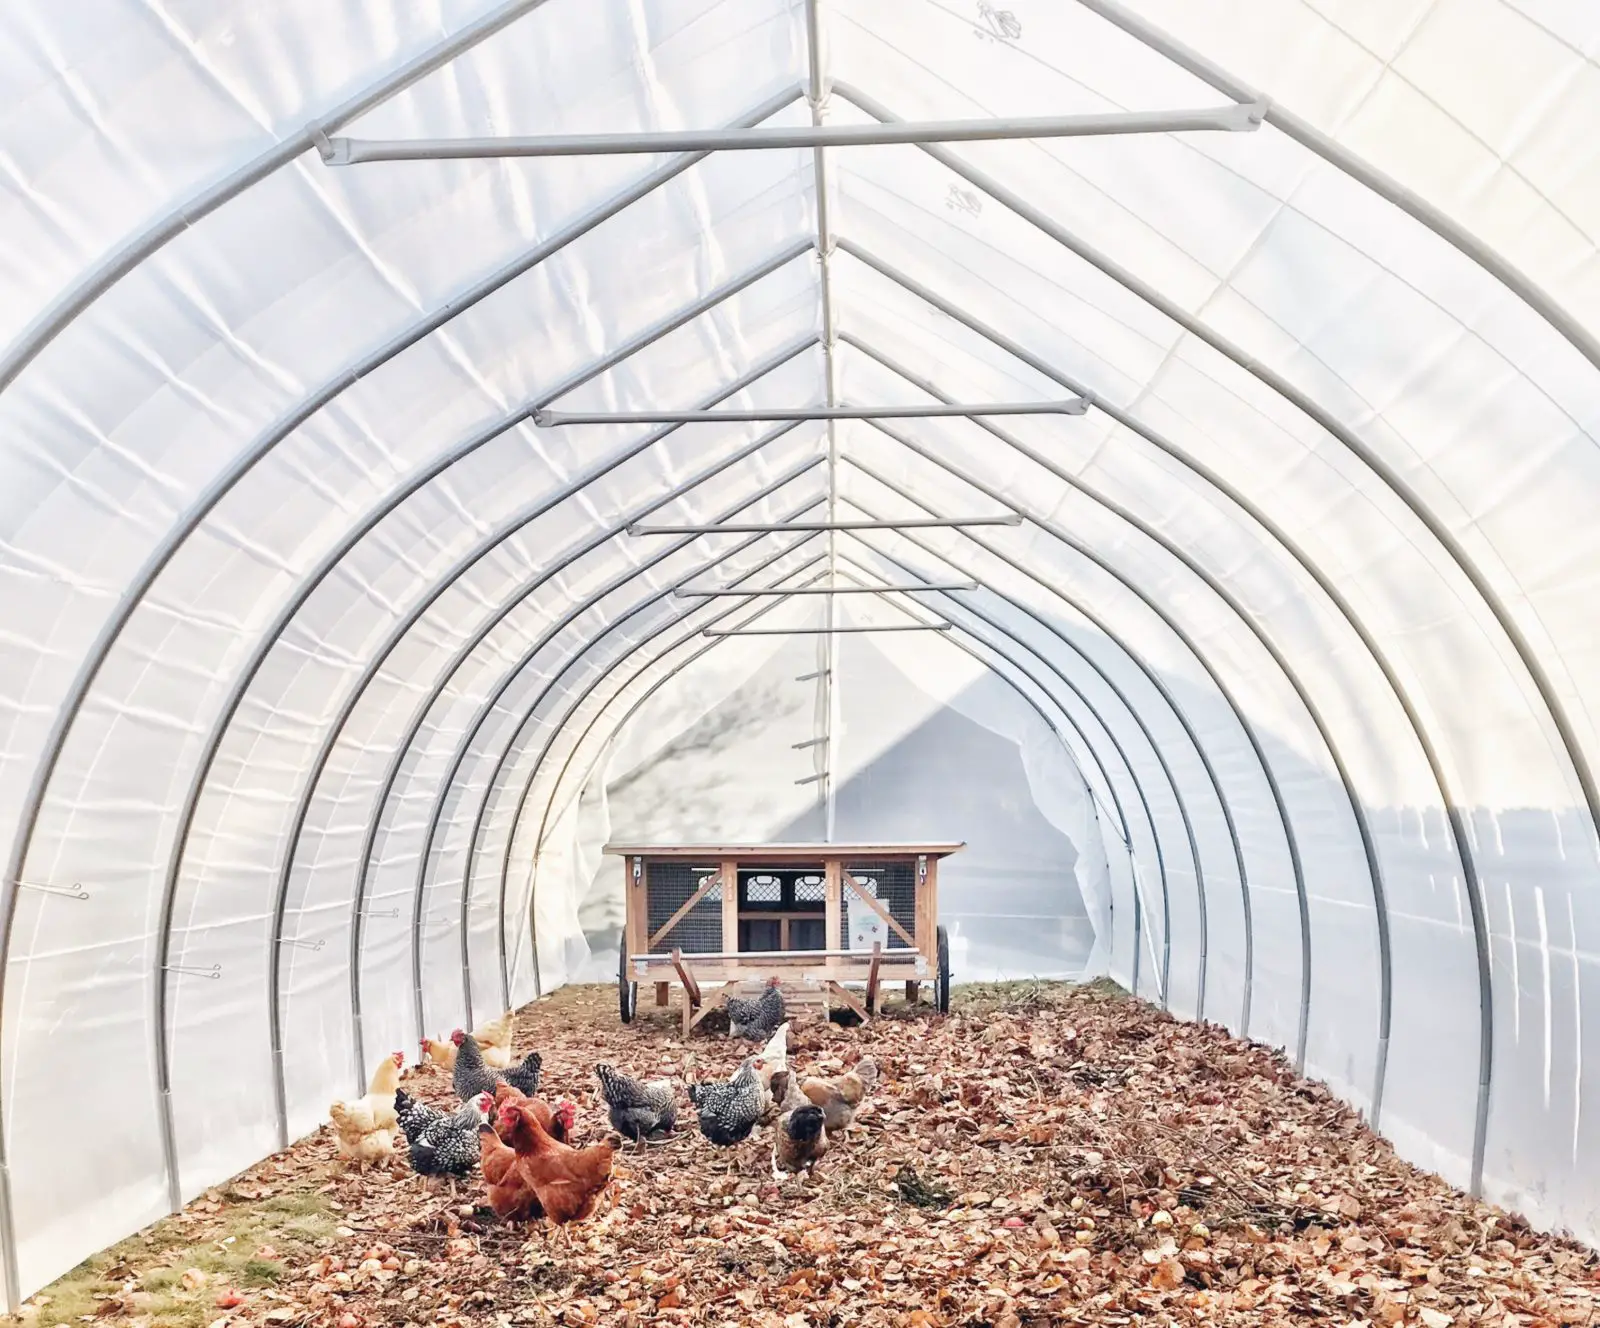 jobs created by chicken farming